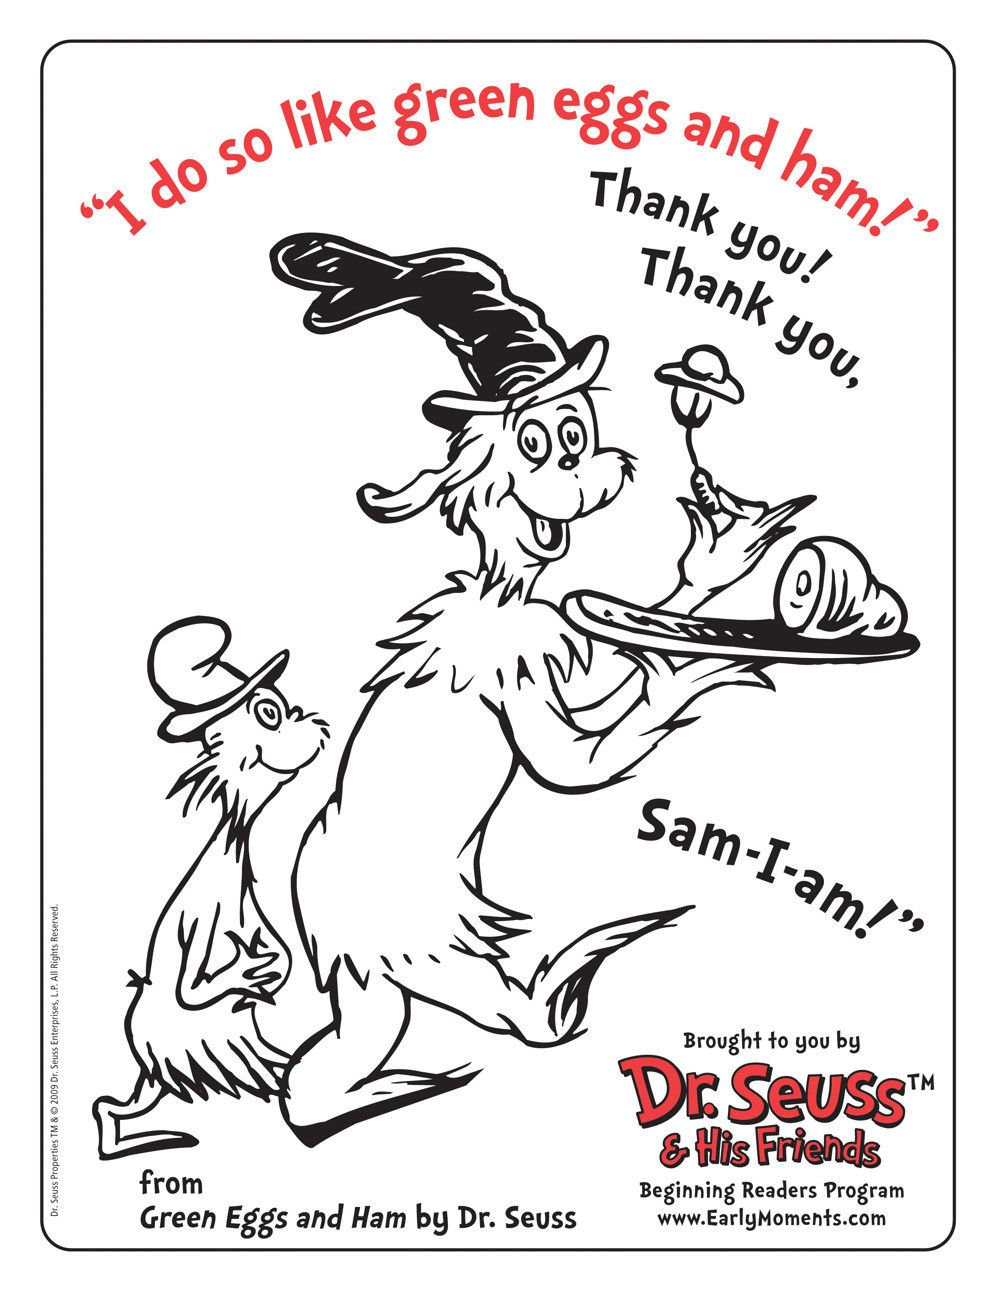 Dr. Seuss and Friends Coloring Contest Contest ...